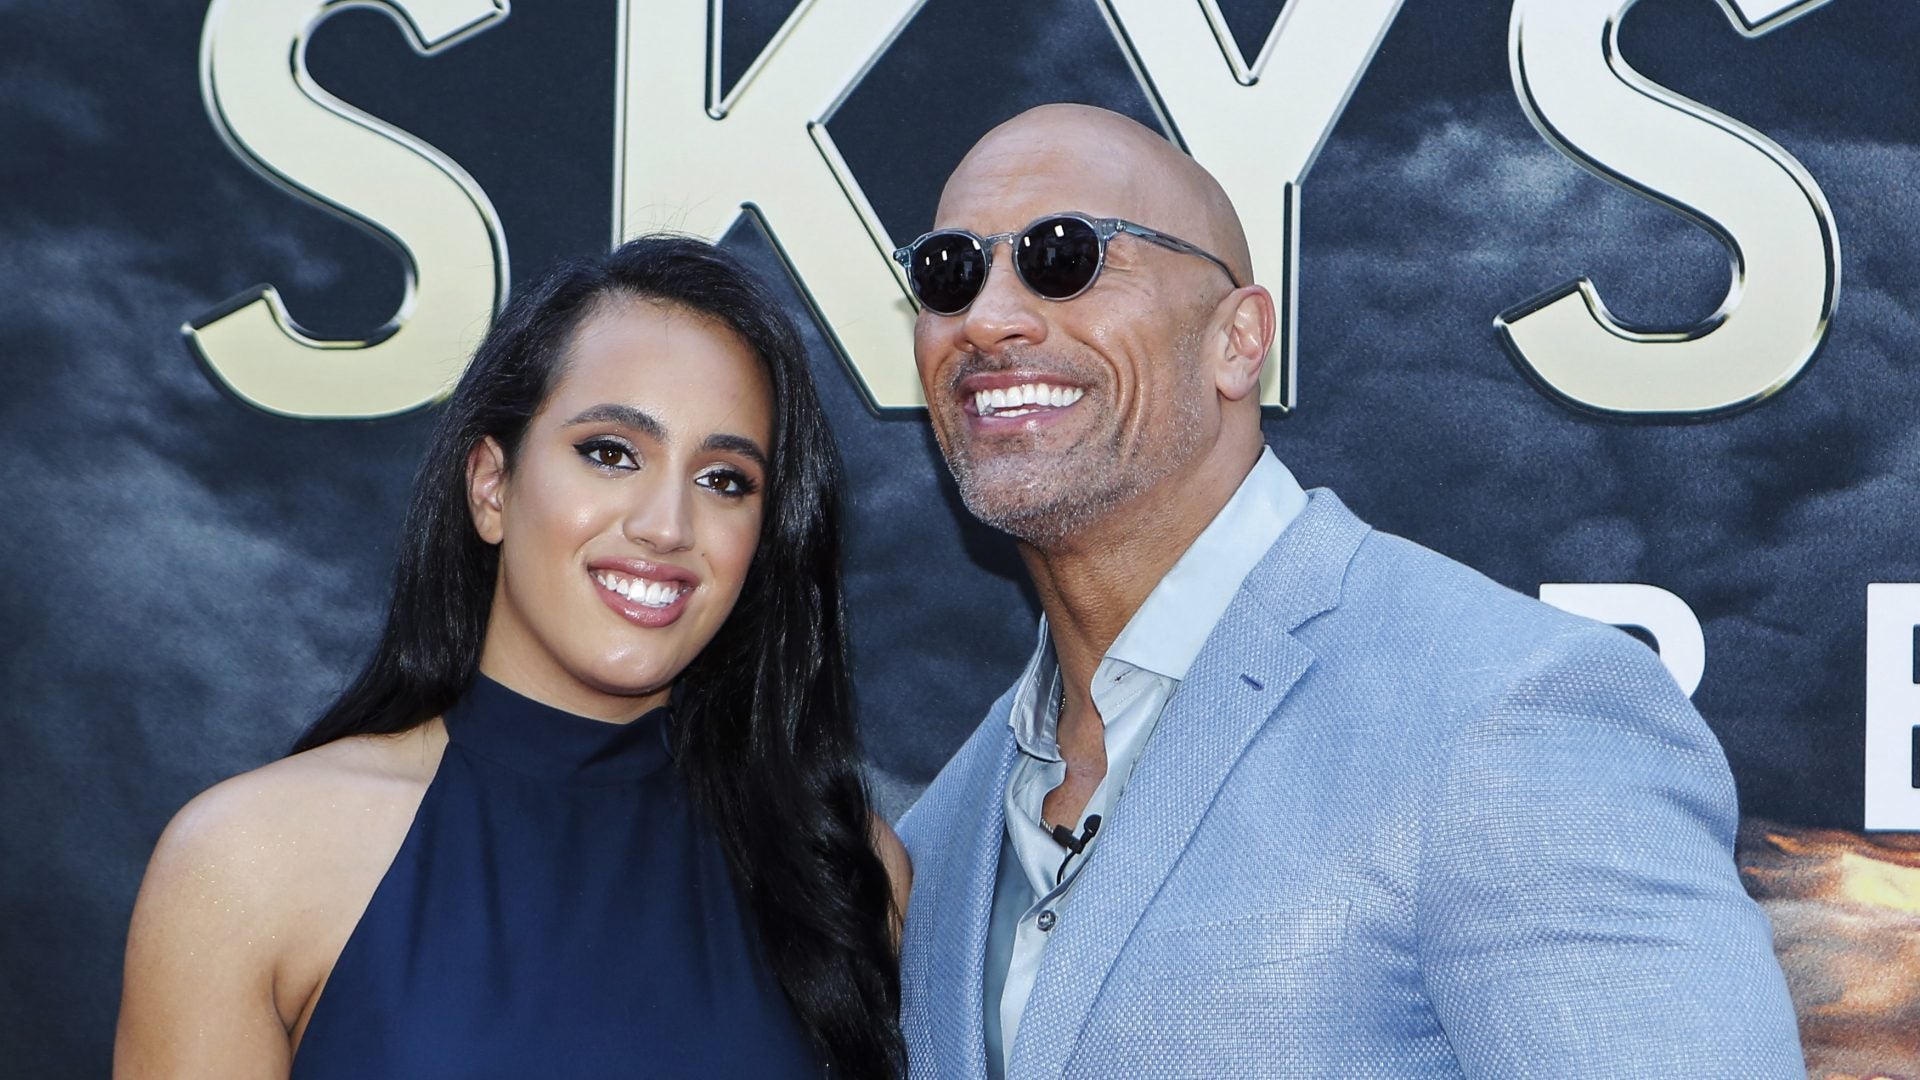 Dwayne 'The Rock' Johnson Says He's 'So Proud' Of Daughter Simone Signing With The WWE